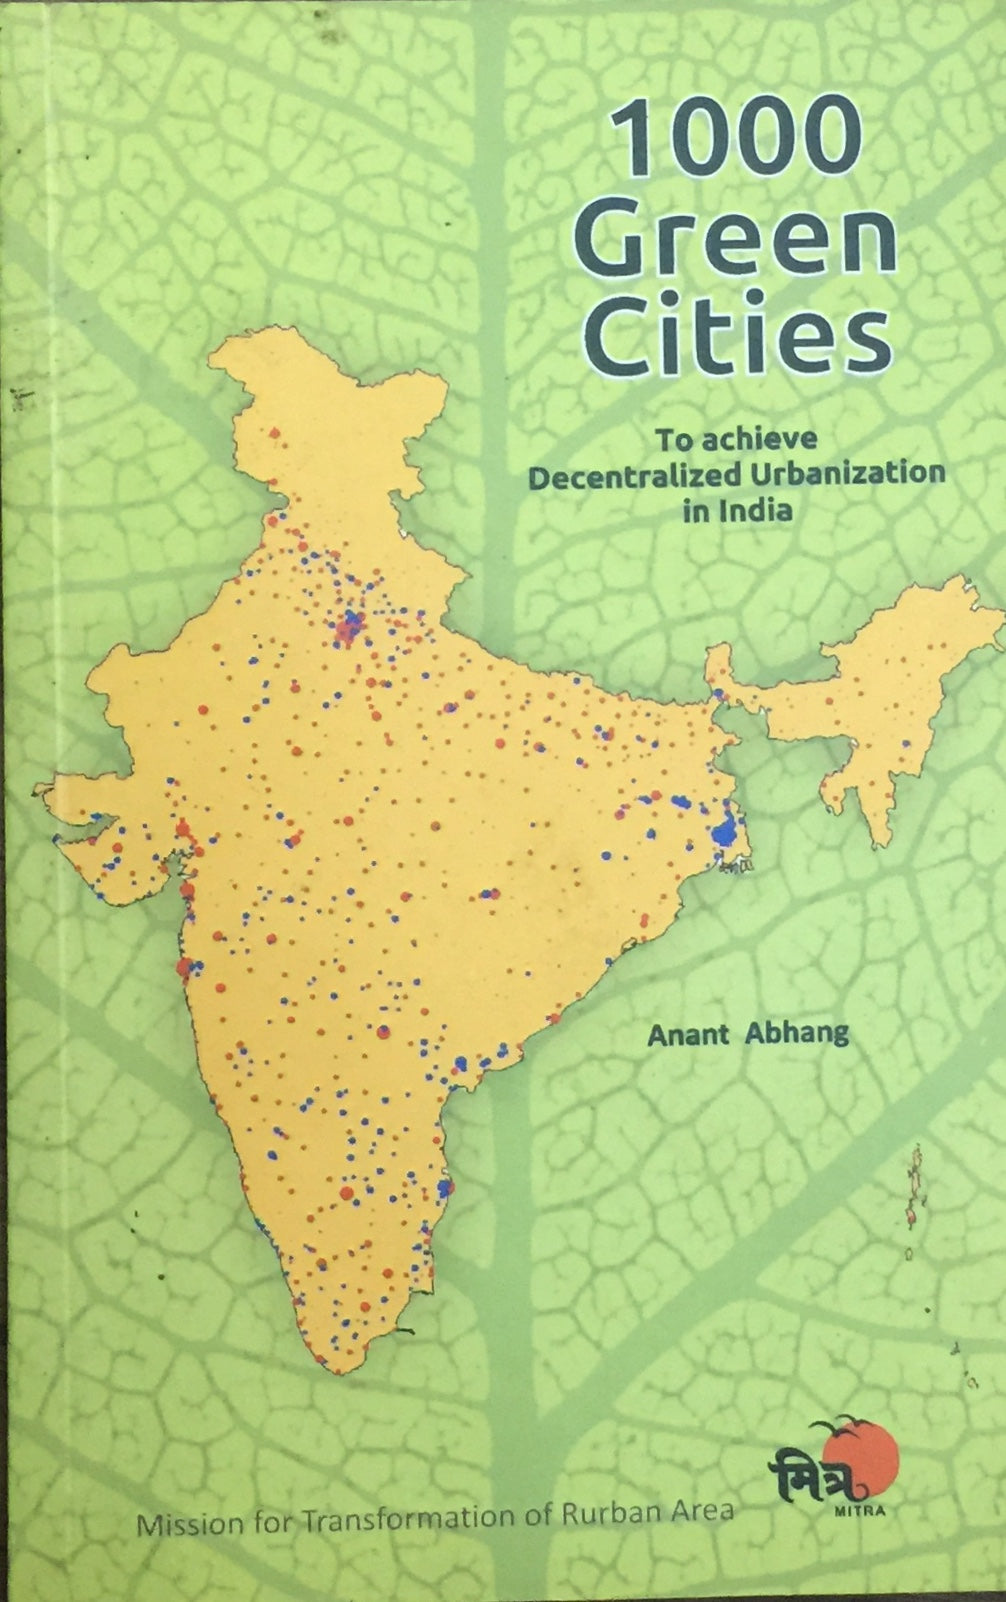 1000 Green Cities by Anant Abhang  Inspire Bookspace Books inspire-bookspace.myshopify.com Half Price Books India